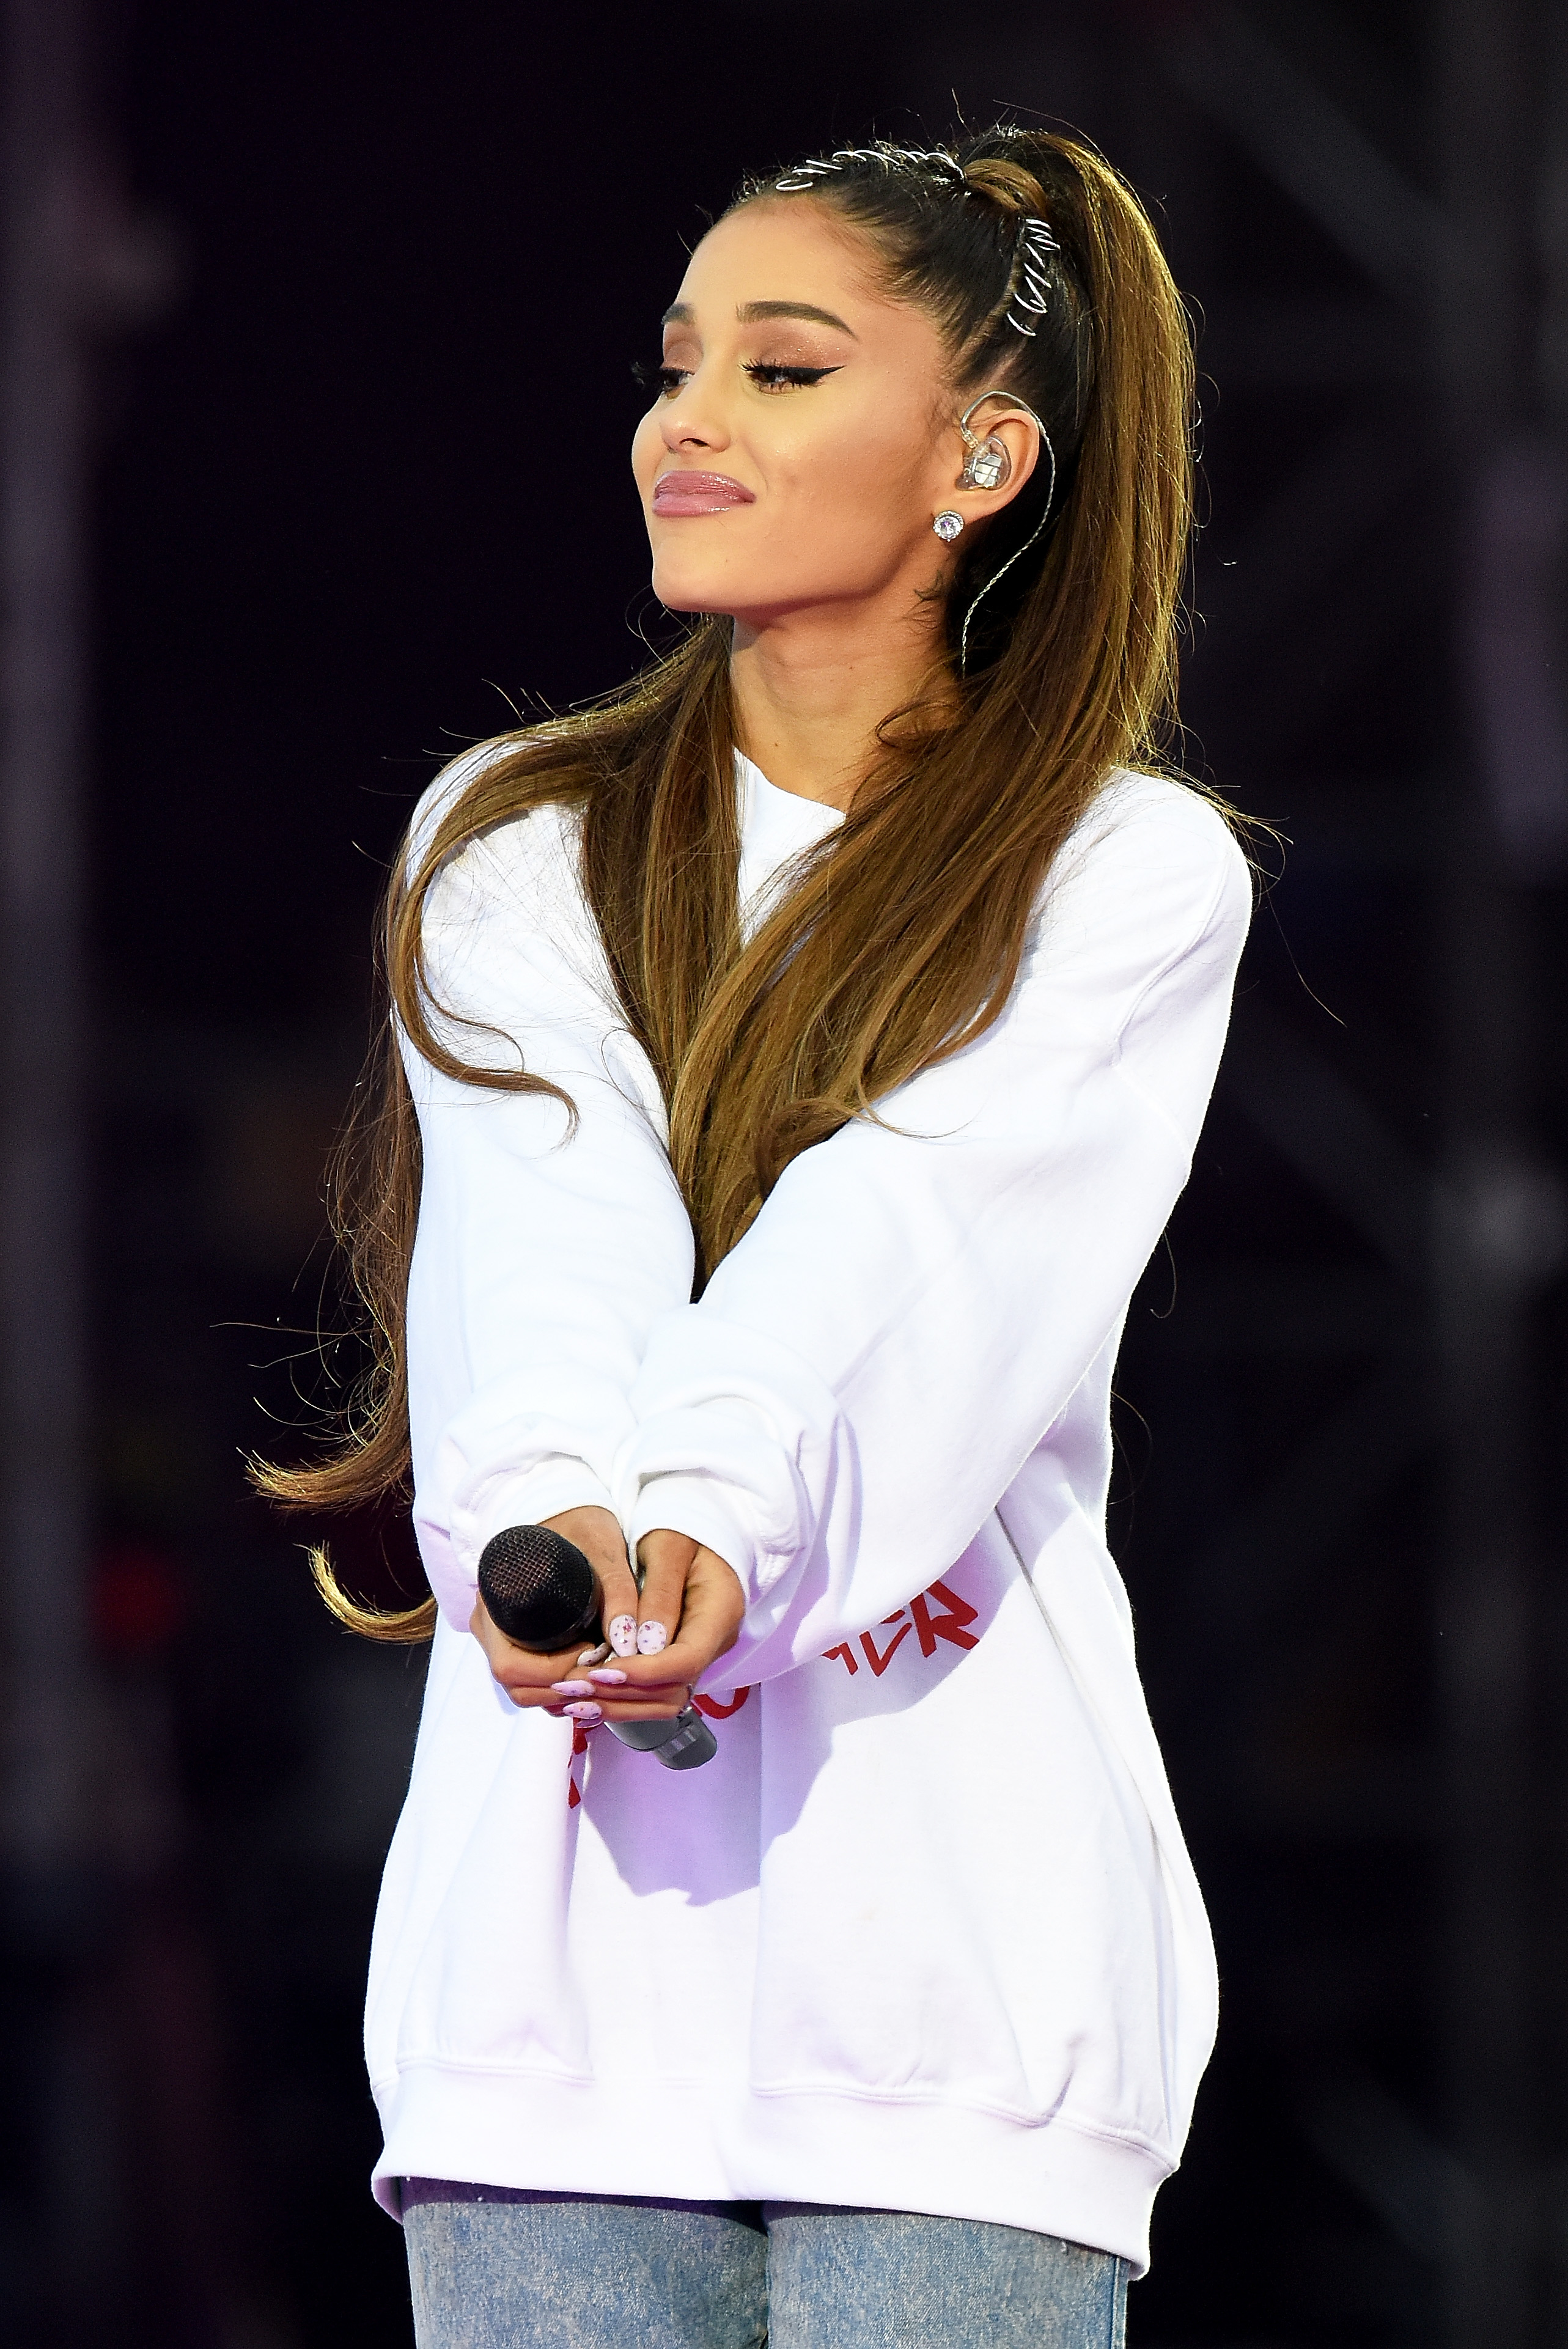 Close-up of Ariana holding a microphone and wearing an oversize sweatshirt and jeans